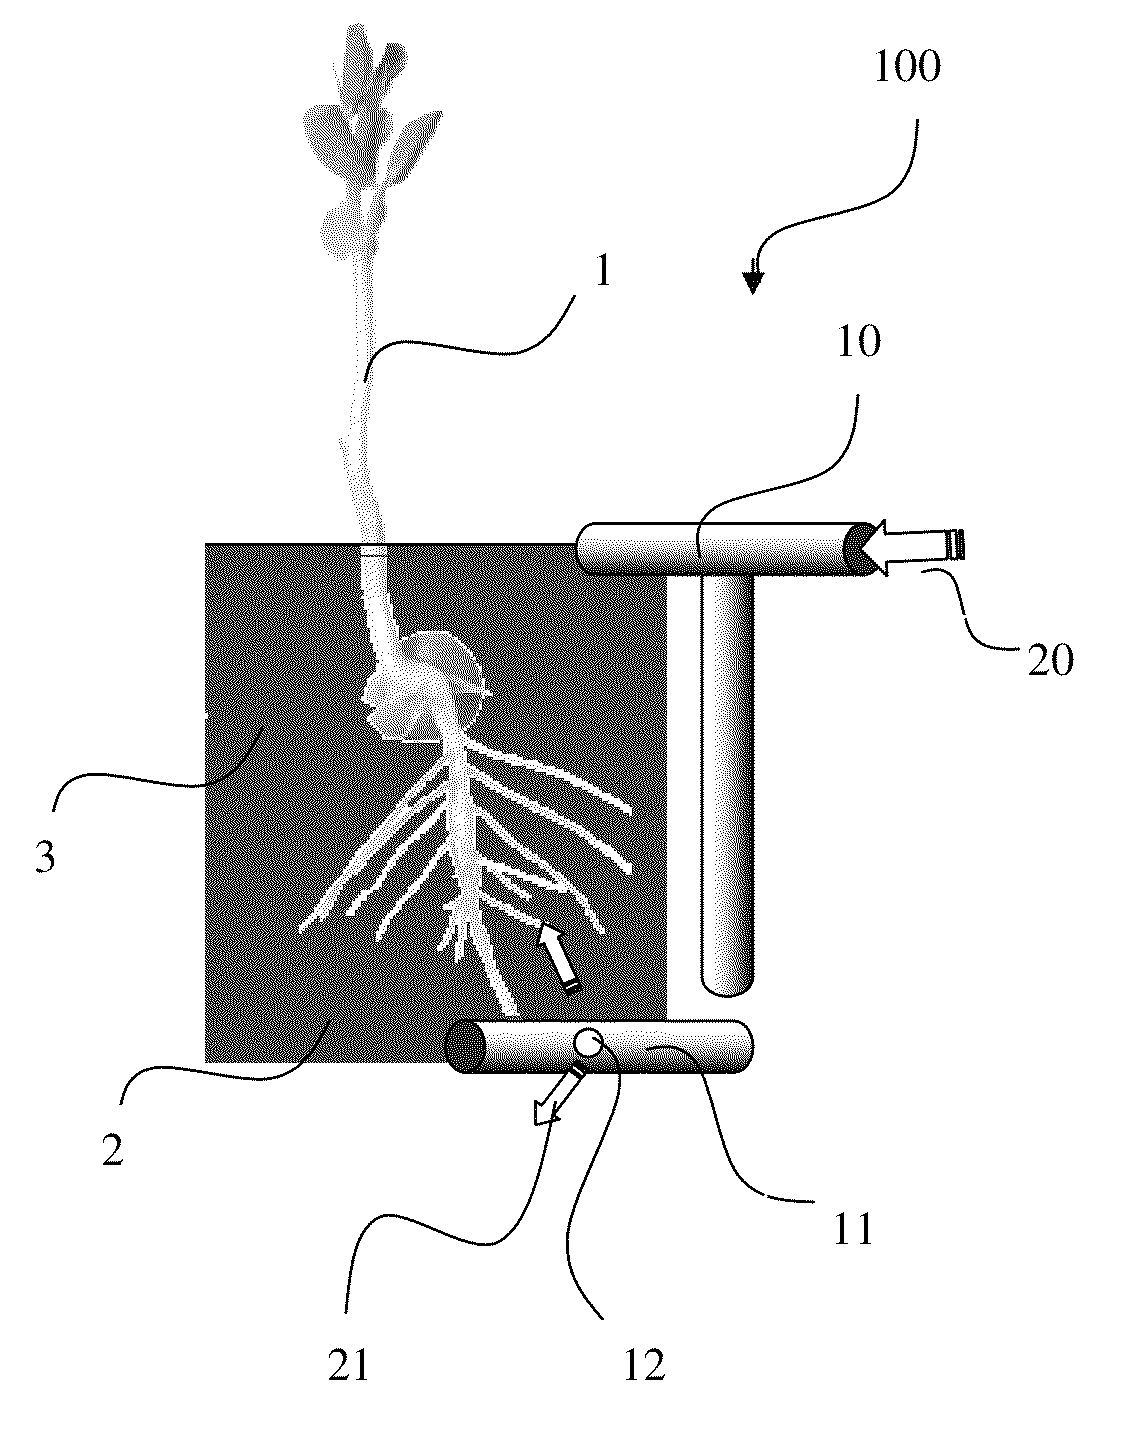 Stationary system for gas treatment of top soil to kill plant pests and methods thereof